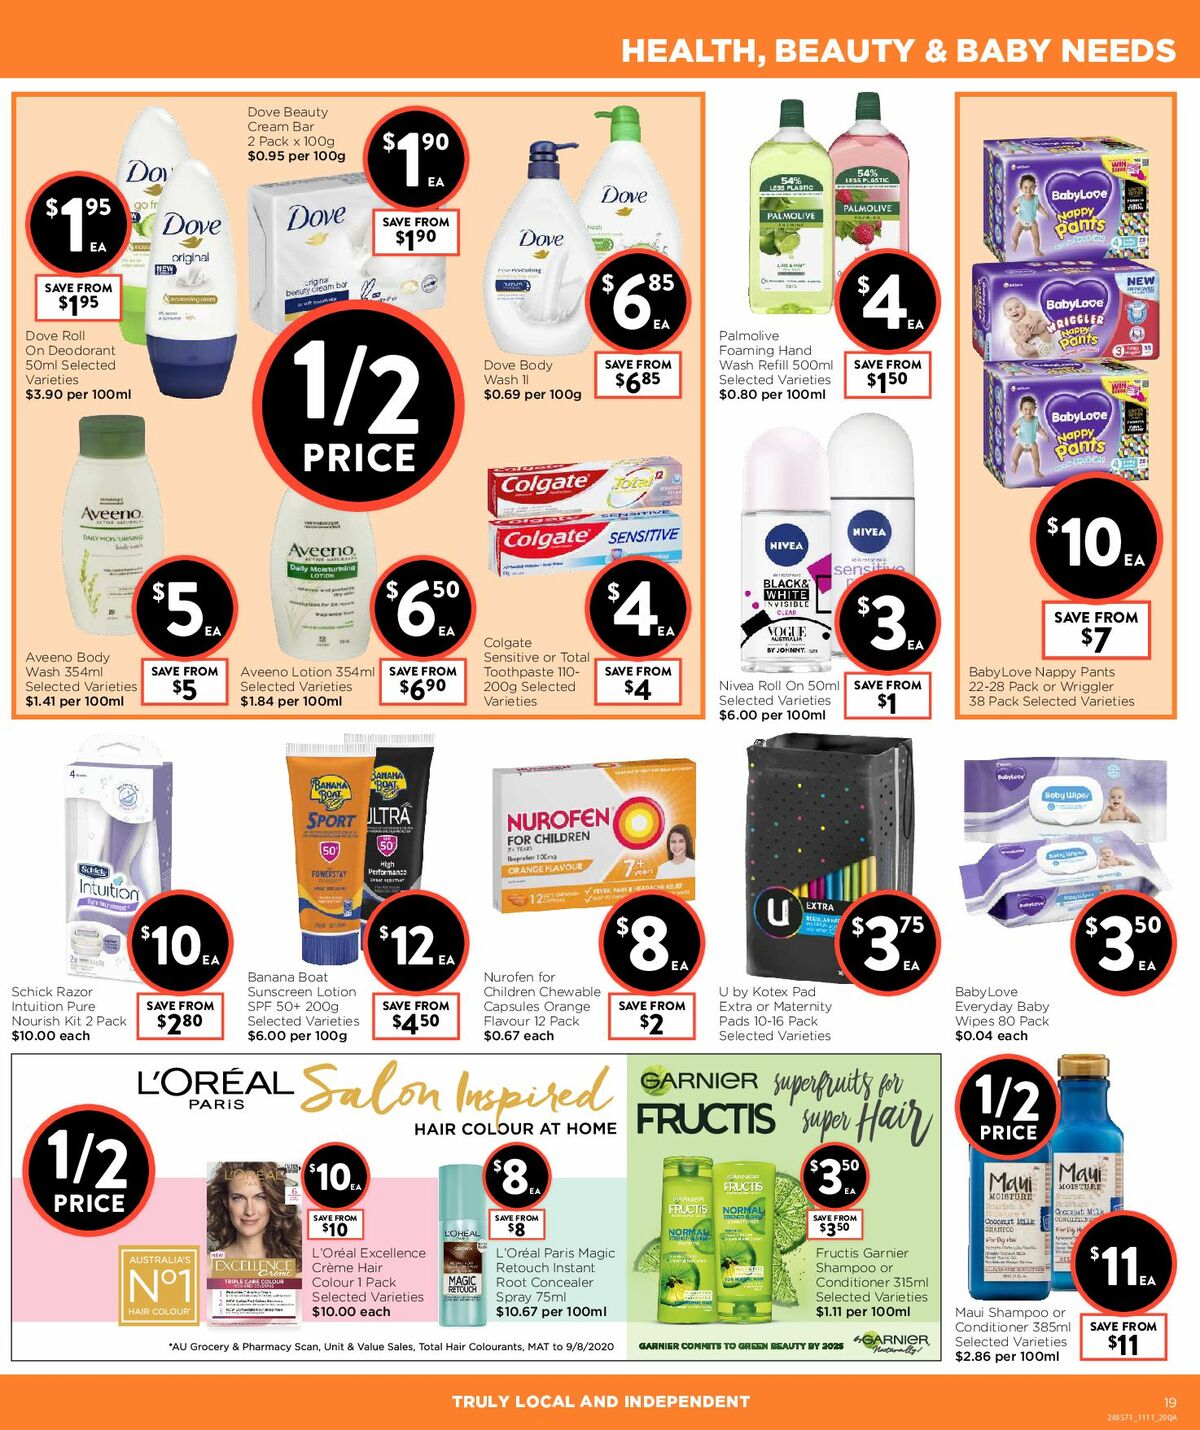 FoodWorks Supermarket Catalogues from 11 November